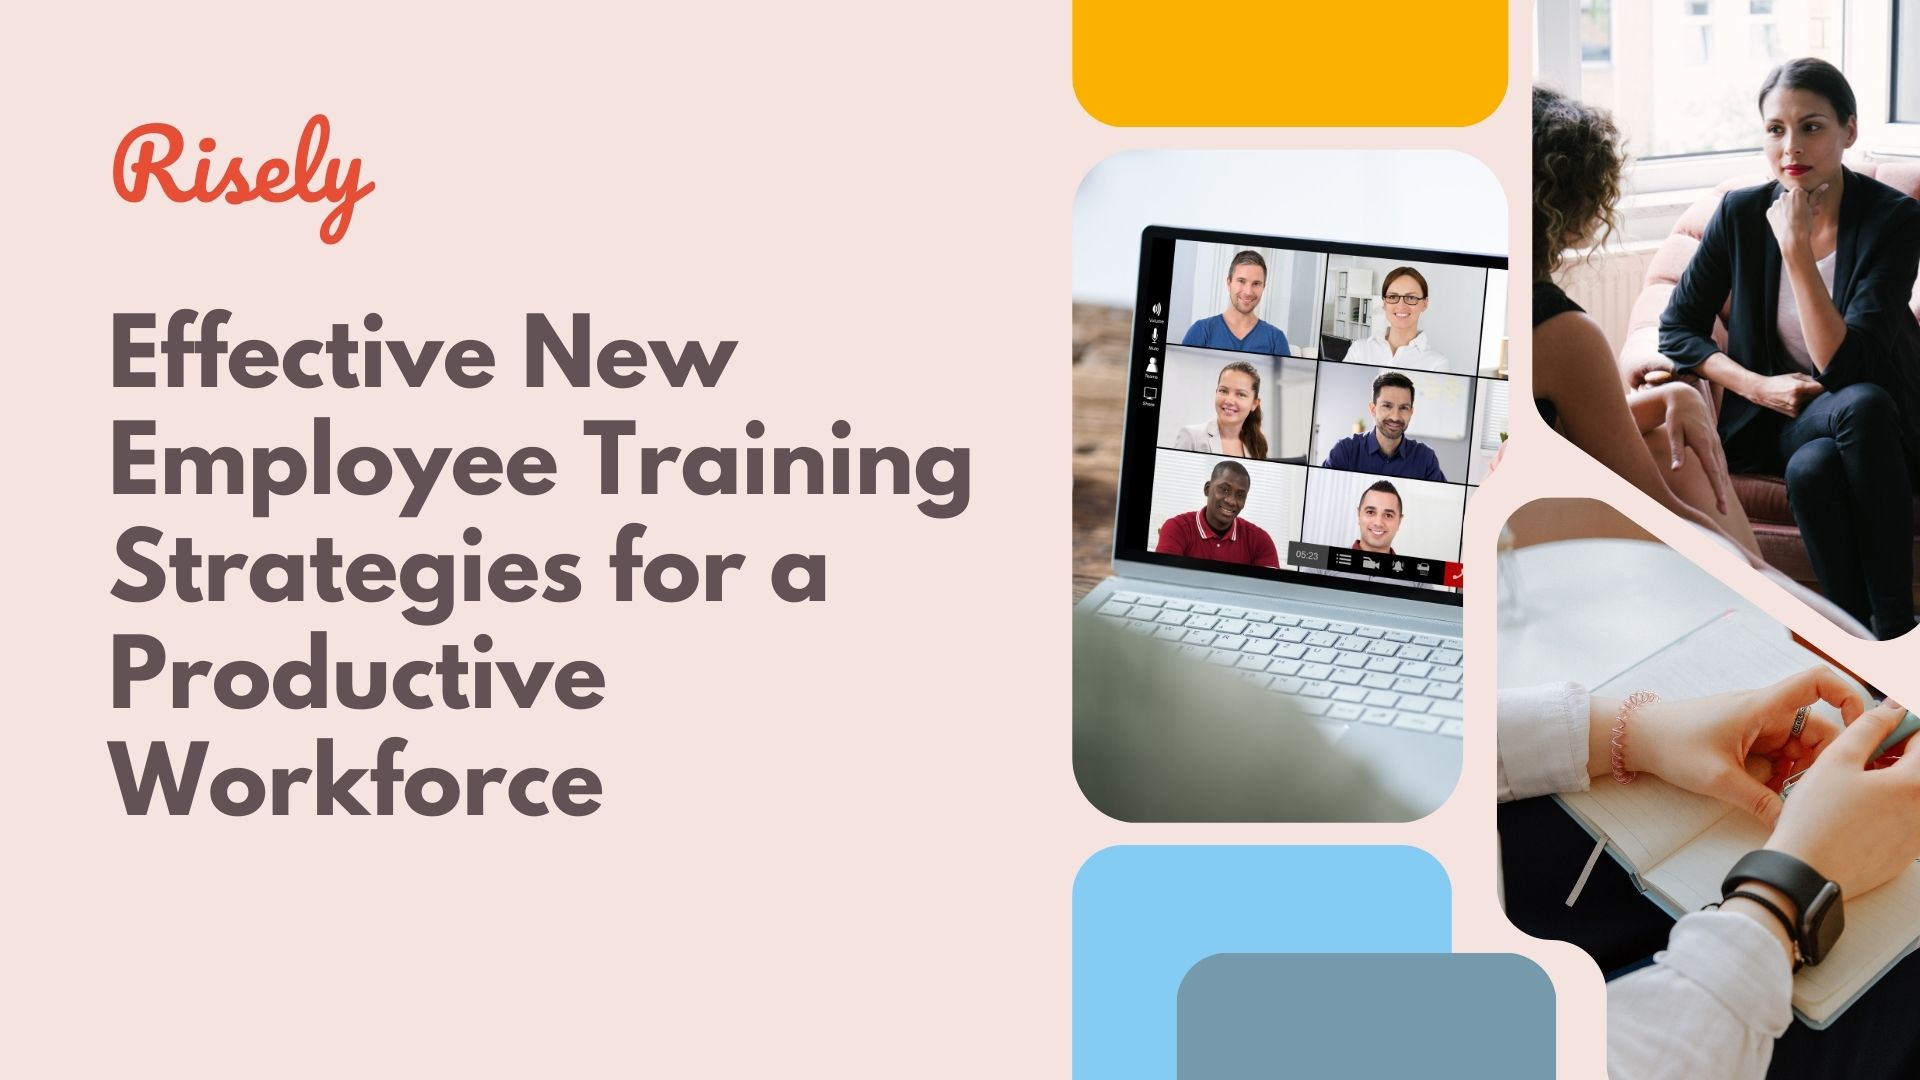 Effective New Employee Training Strategies for a Productive Workforce